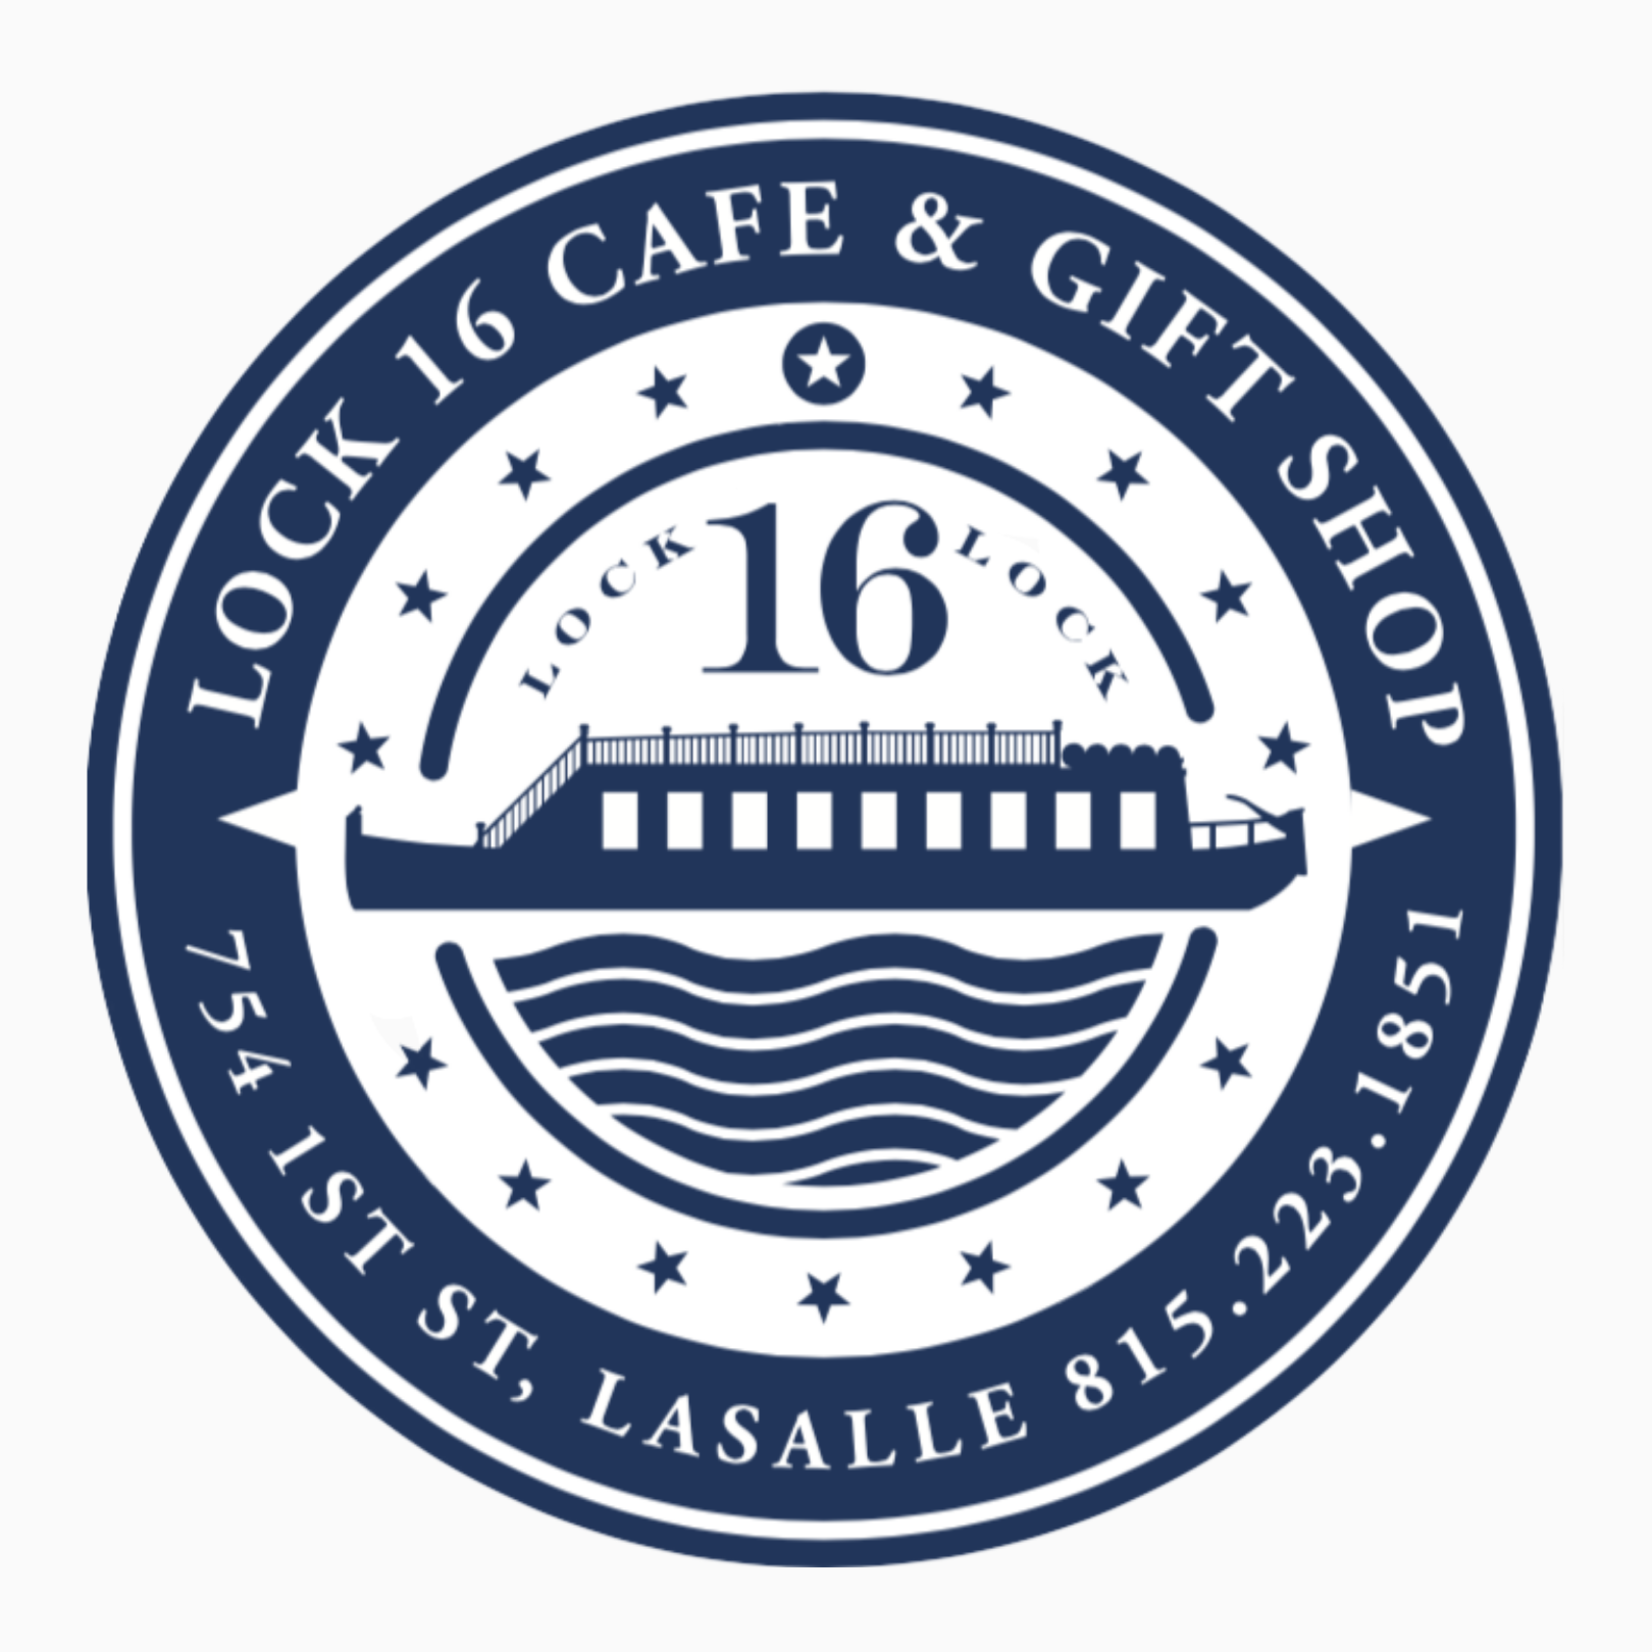 I & M Canal Boat and Lock 16-Lasalle I & M Canal Boat and Lock 16-Lasalle $10.00 Dining Certificate at Lock 16 Café